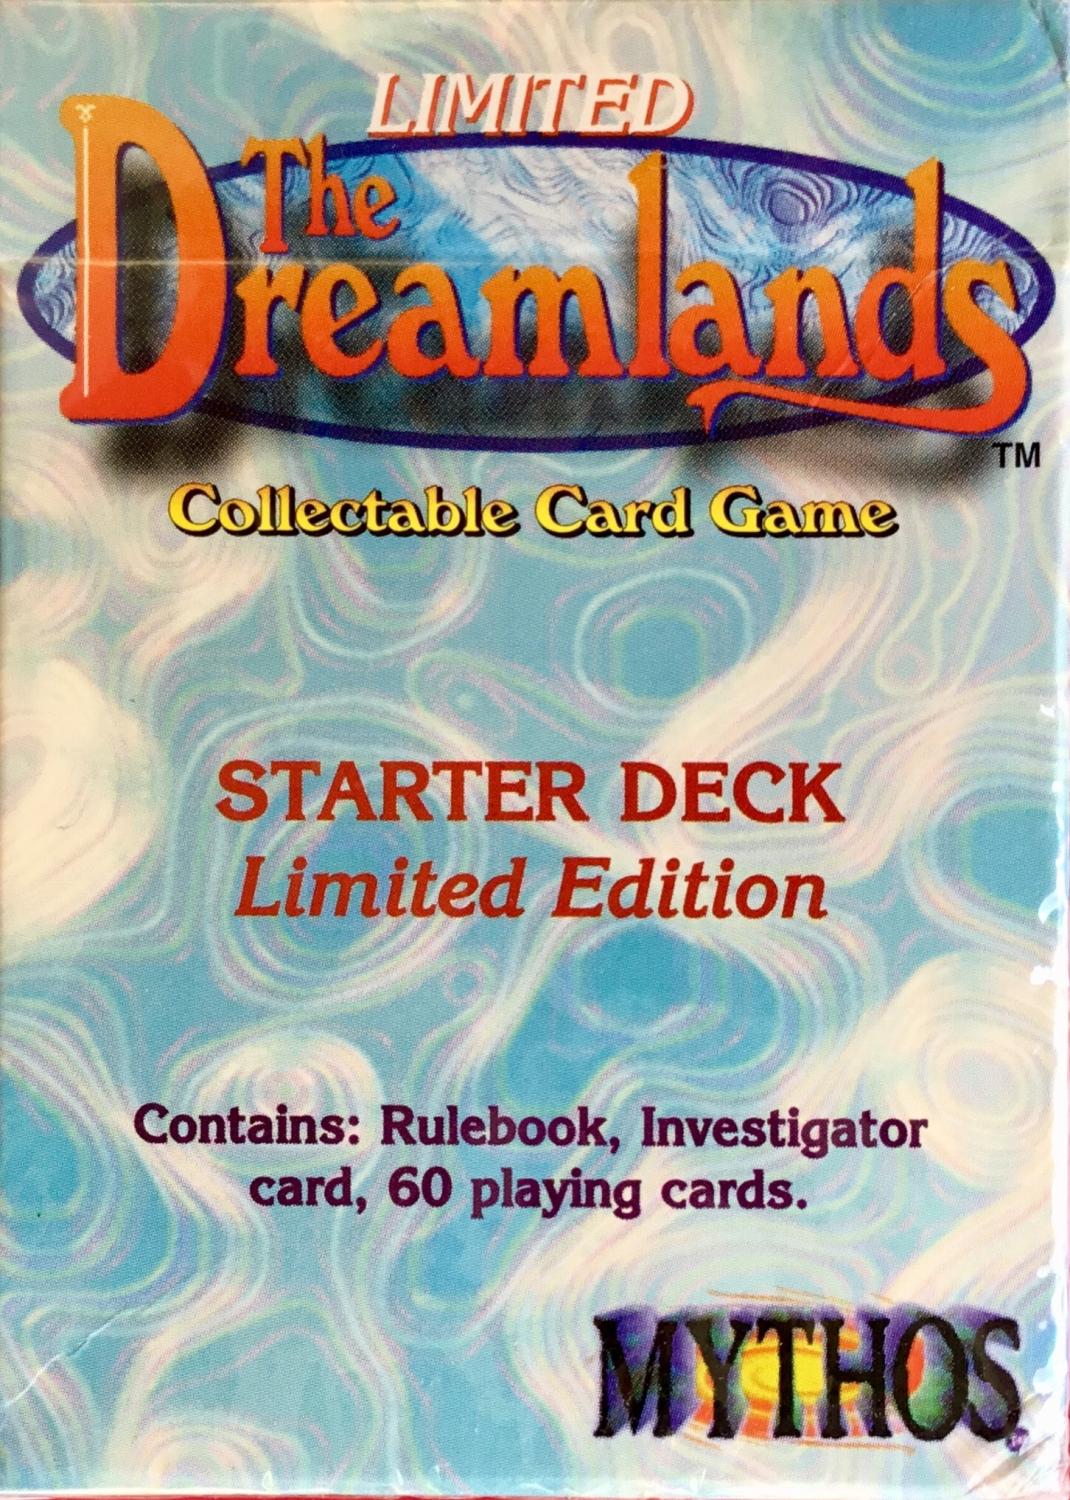 Mythos The Dreamlands collectible card game starter deck New Sealed 